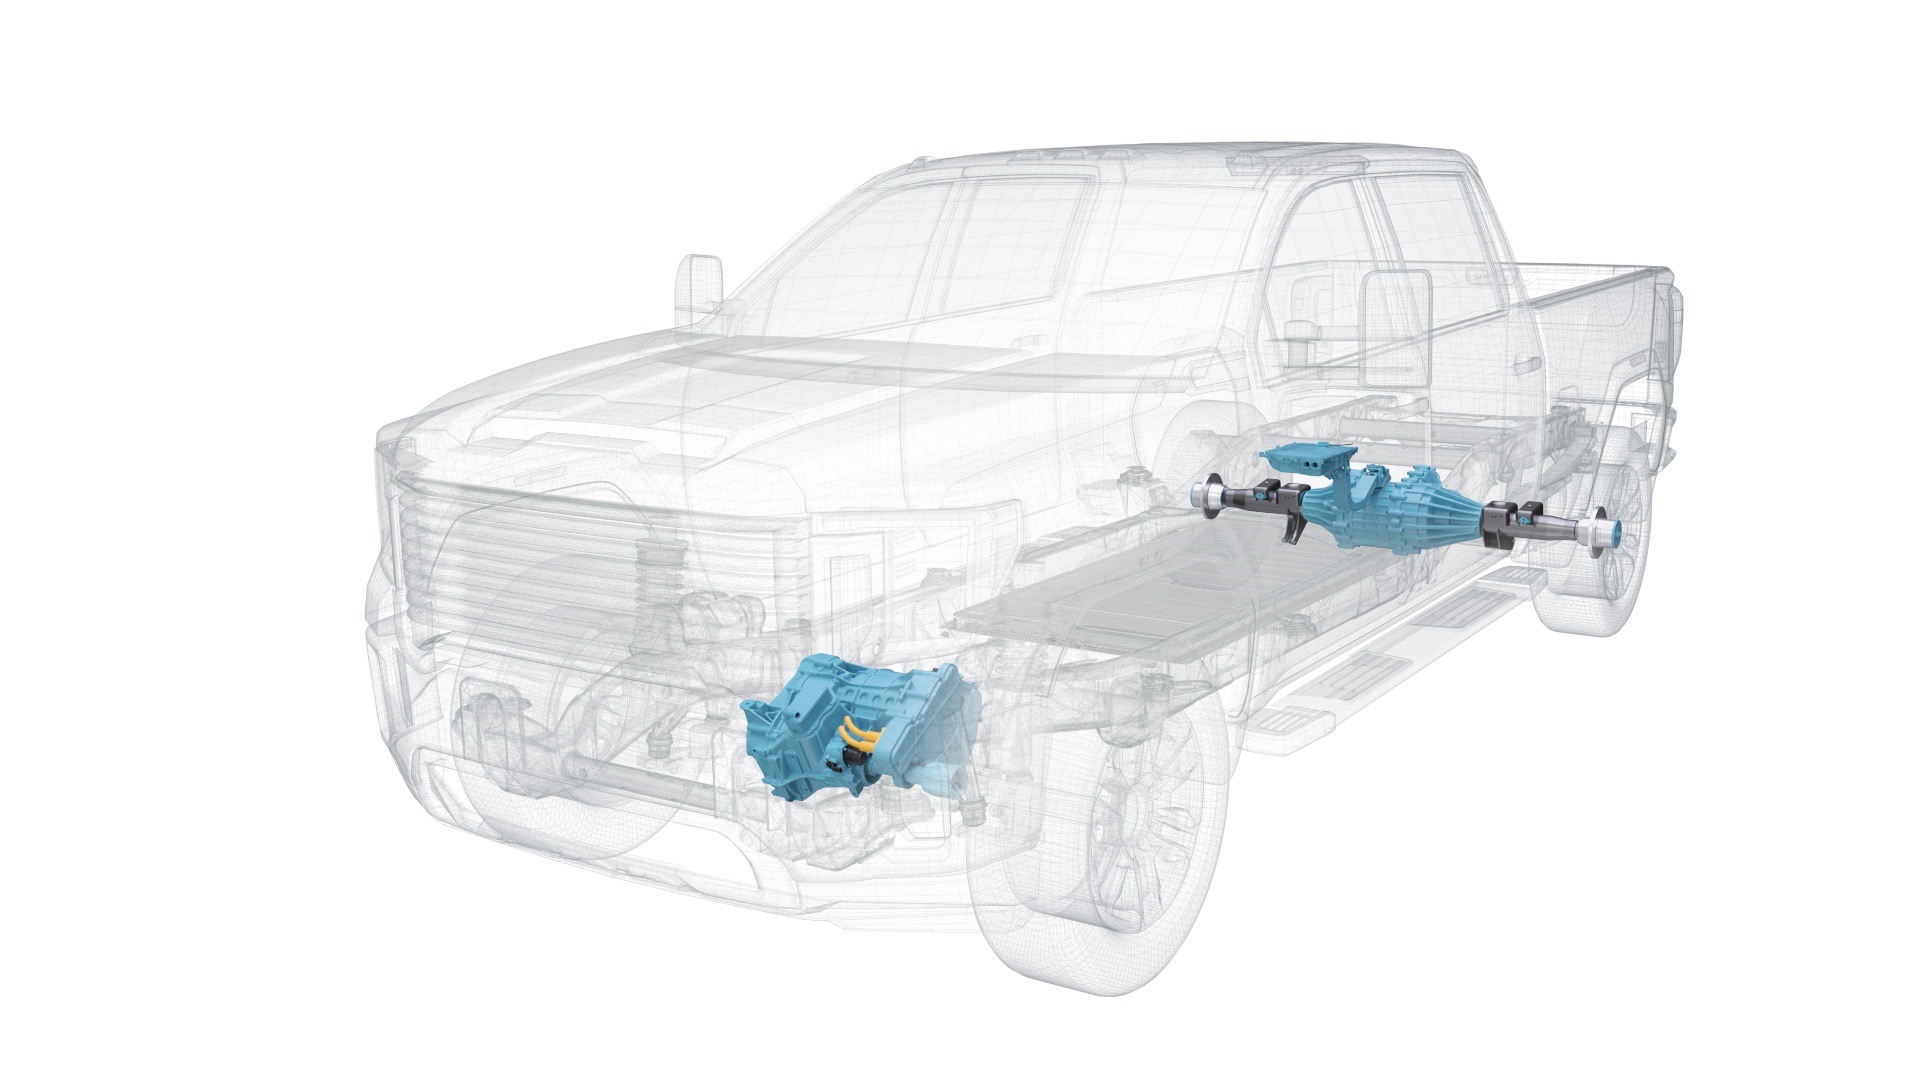 Magna developed a drop-in electric powertrain for heavy-duty pickup trucks Auto Recent